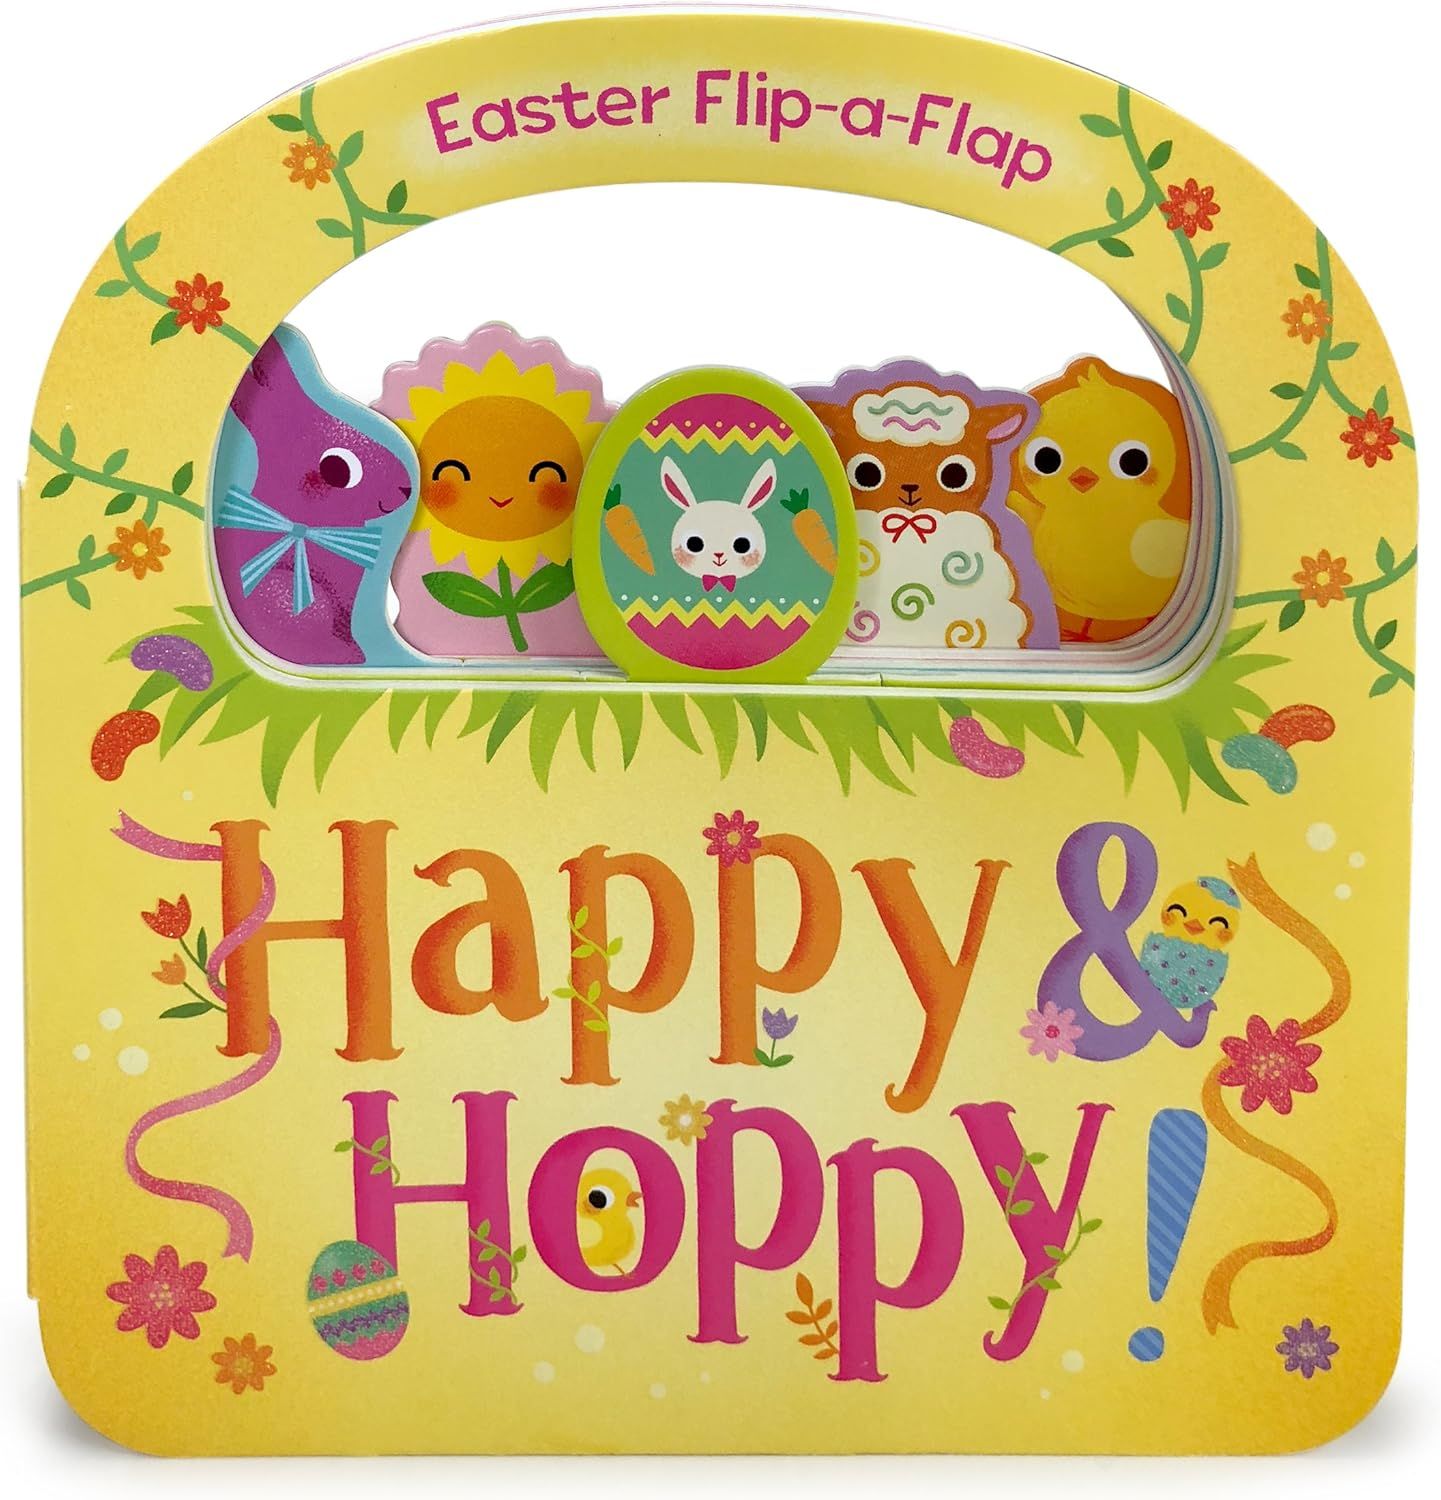 Happy & Hoppy - Children's Flip-a-Flap Activity Board Book for Easter Baskets and Springtime Fun, Ag | Amazon (US)